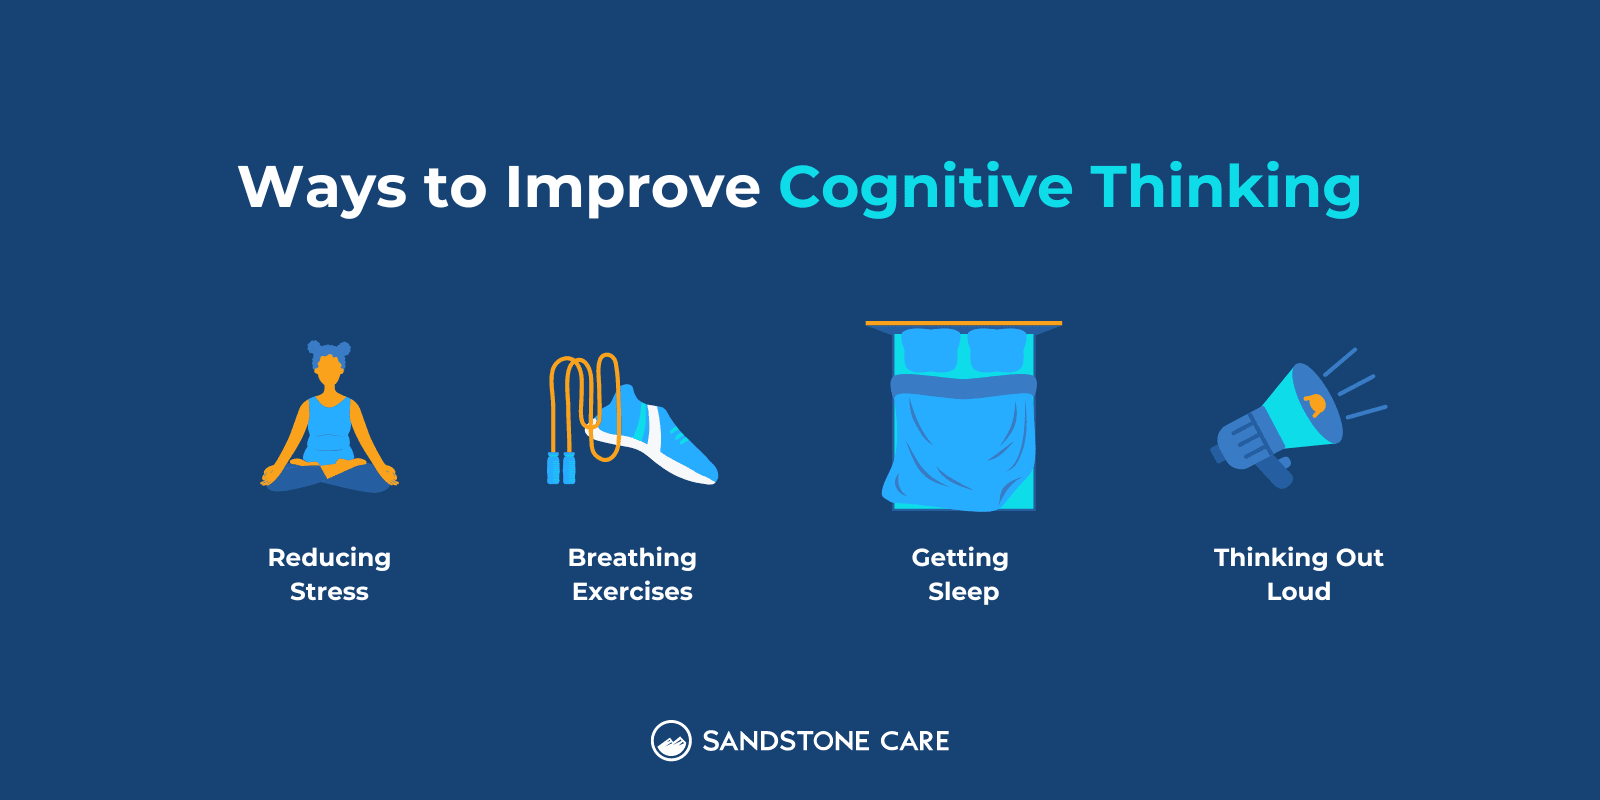 Ways to improve thinking demonstrated with relevant icons; meditation, running shoes and jumping ropes, a bed, and a loud speaker